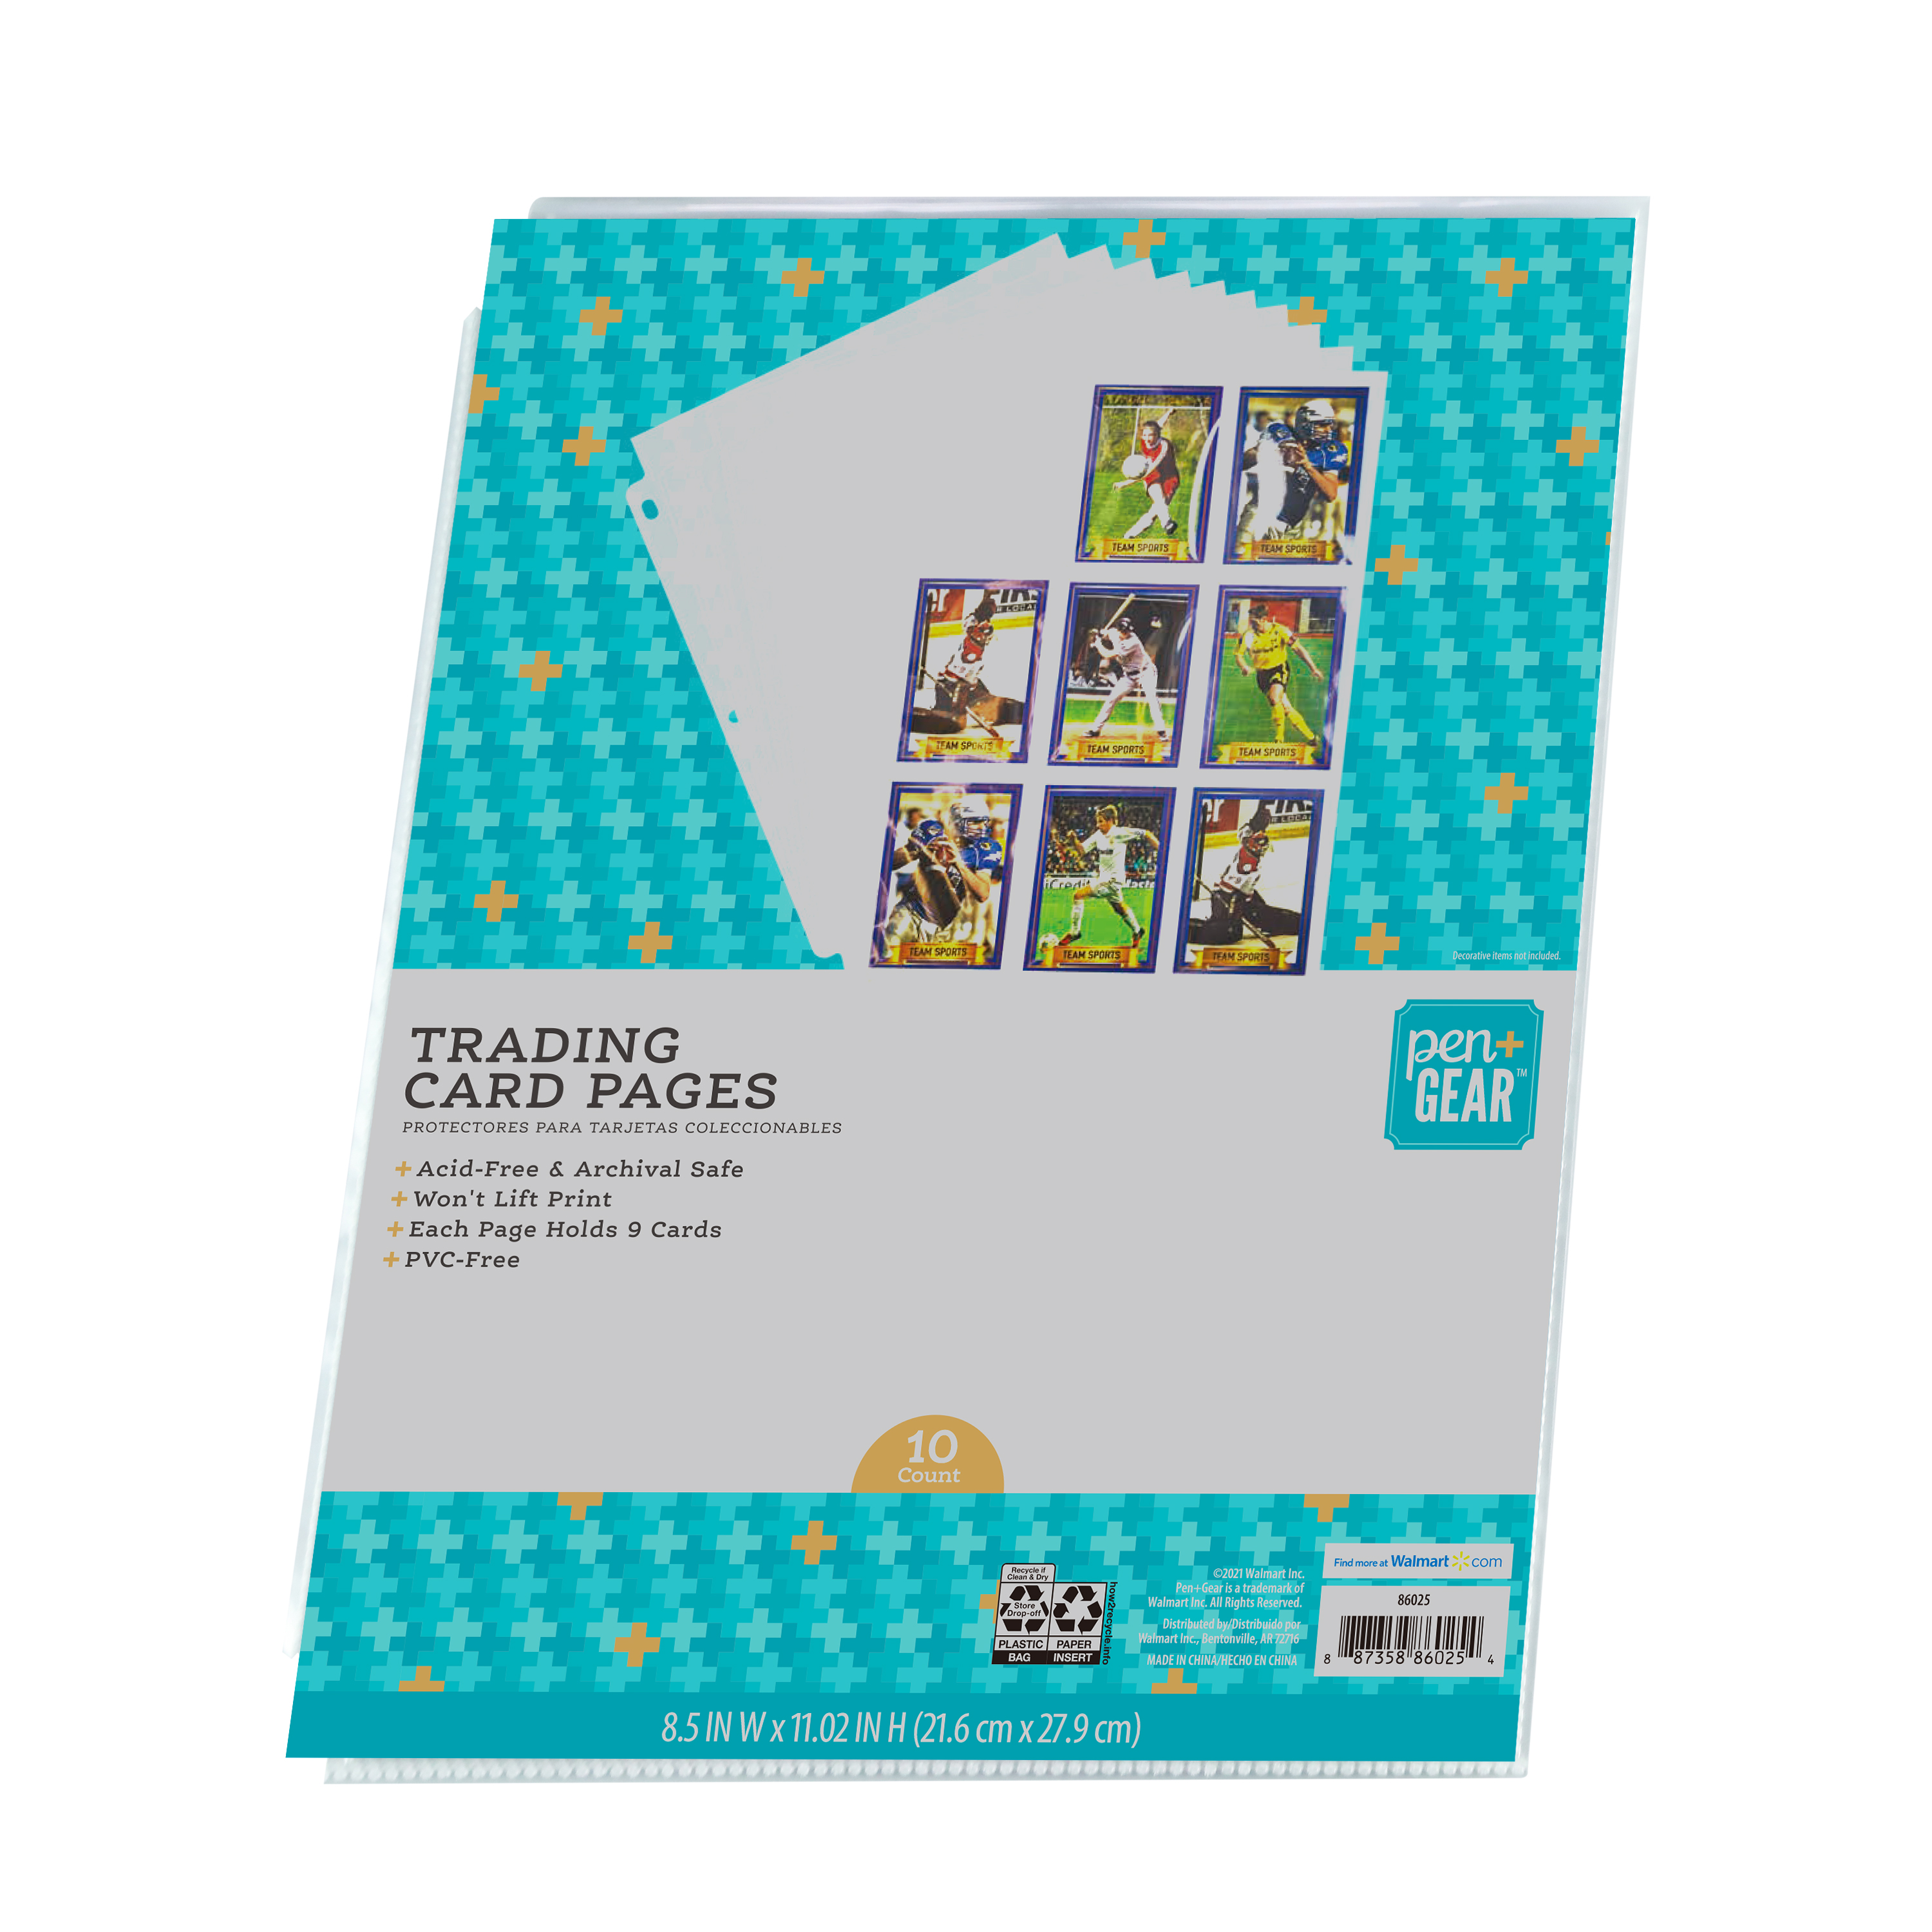 Pen + Gear 9-Pocket Protective Trading Card Pages, Sheet Protectors, Clear, 10 Count - image 3 of 5